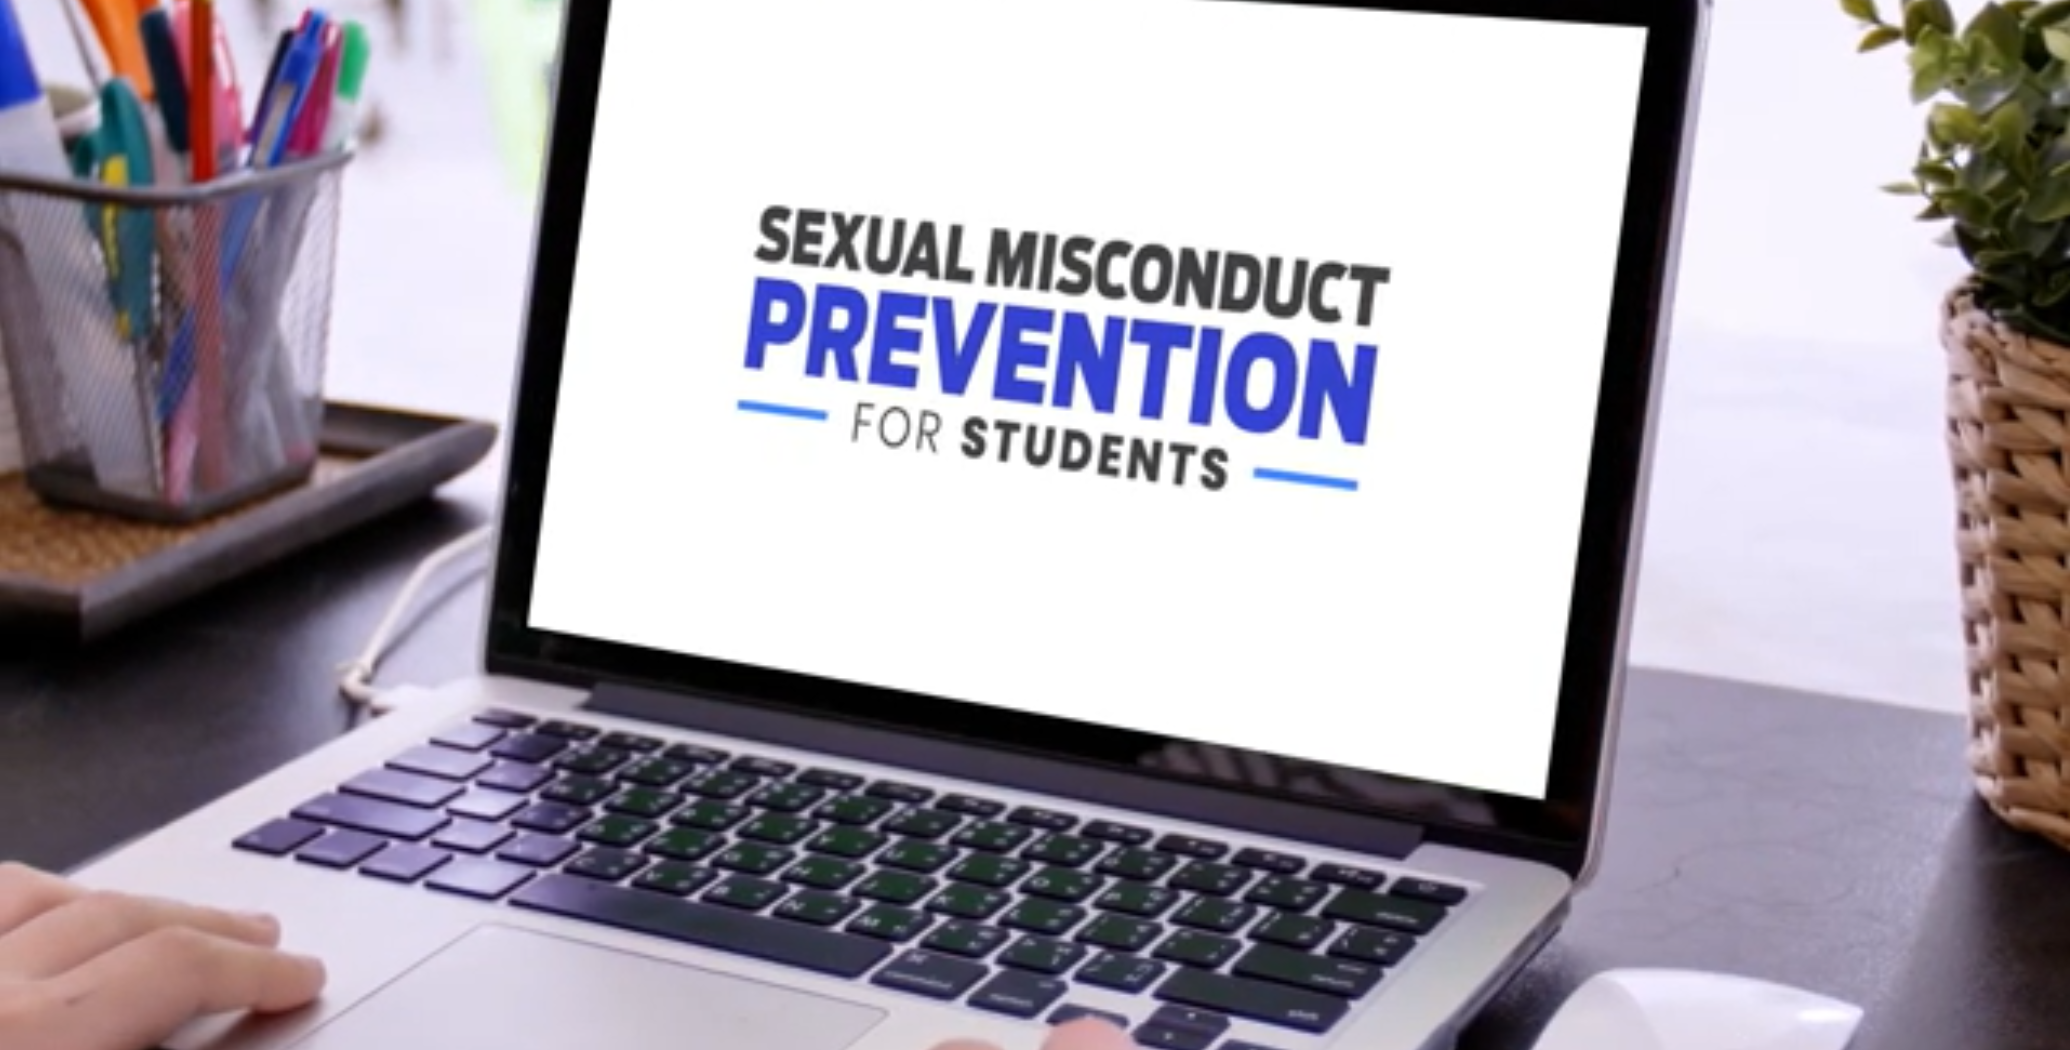 Kognito Trailer: Sexual Misconduct Prevention for Students